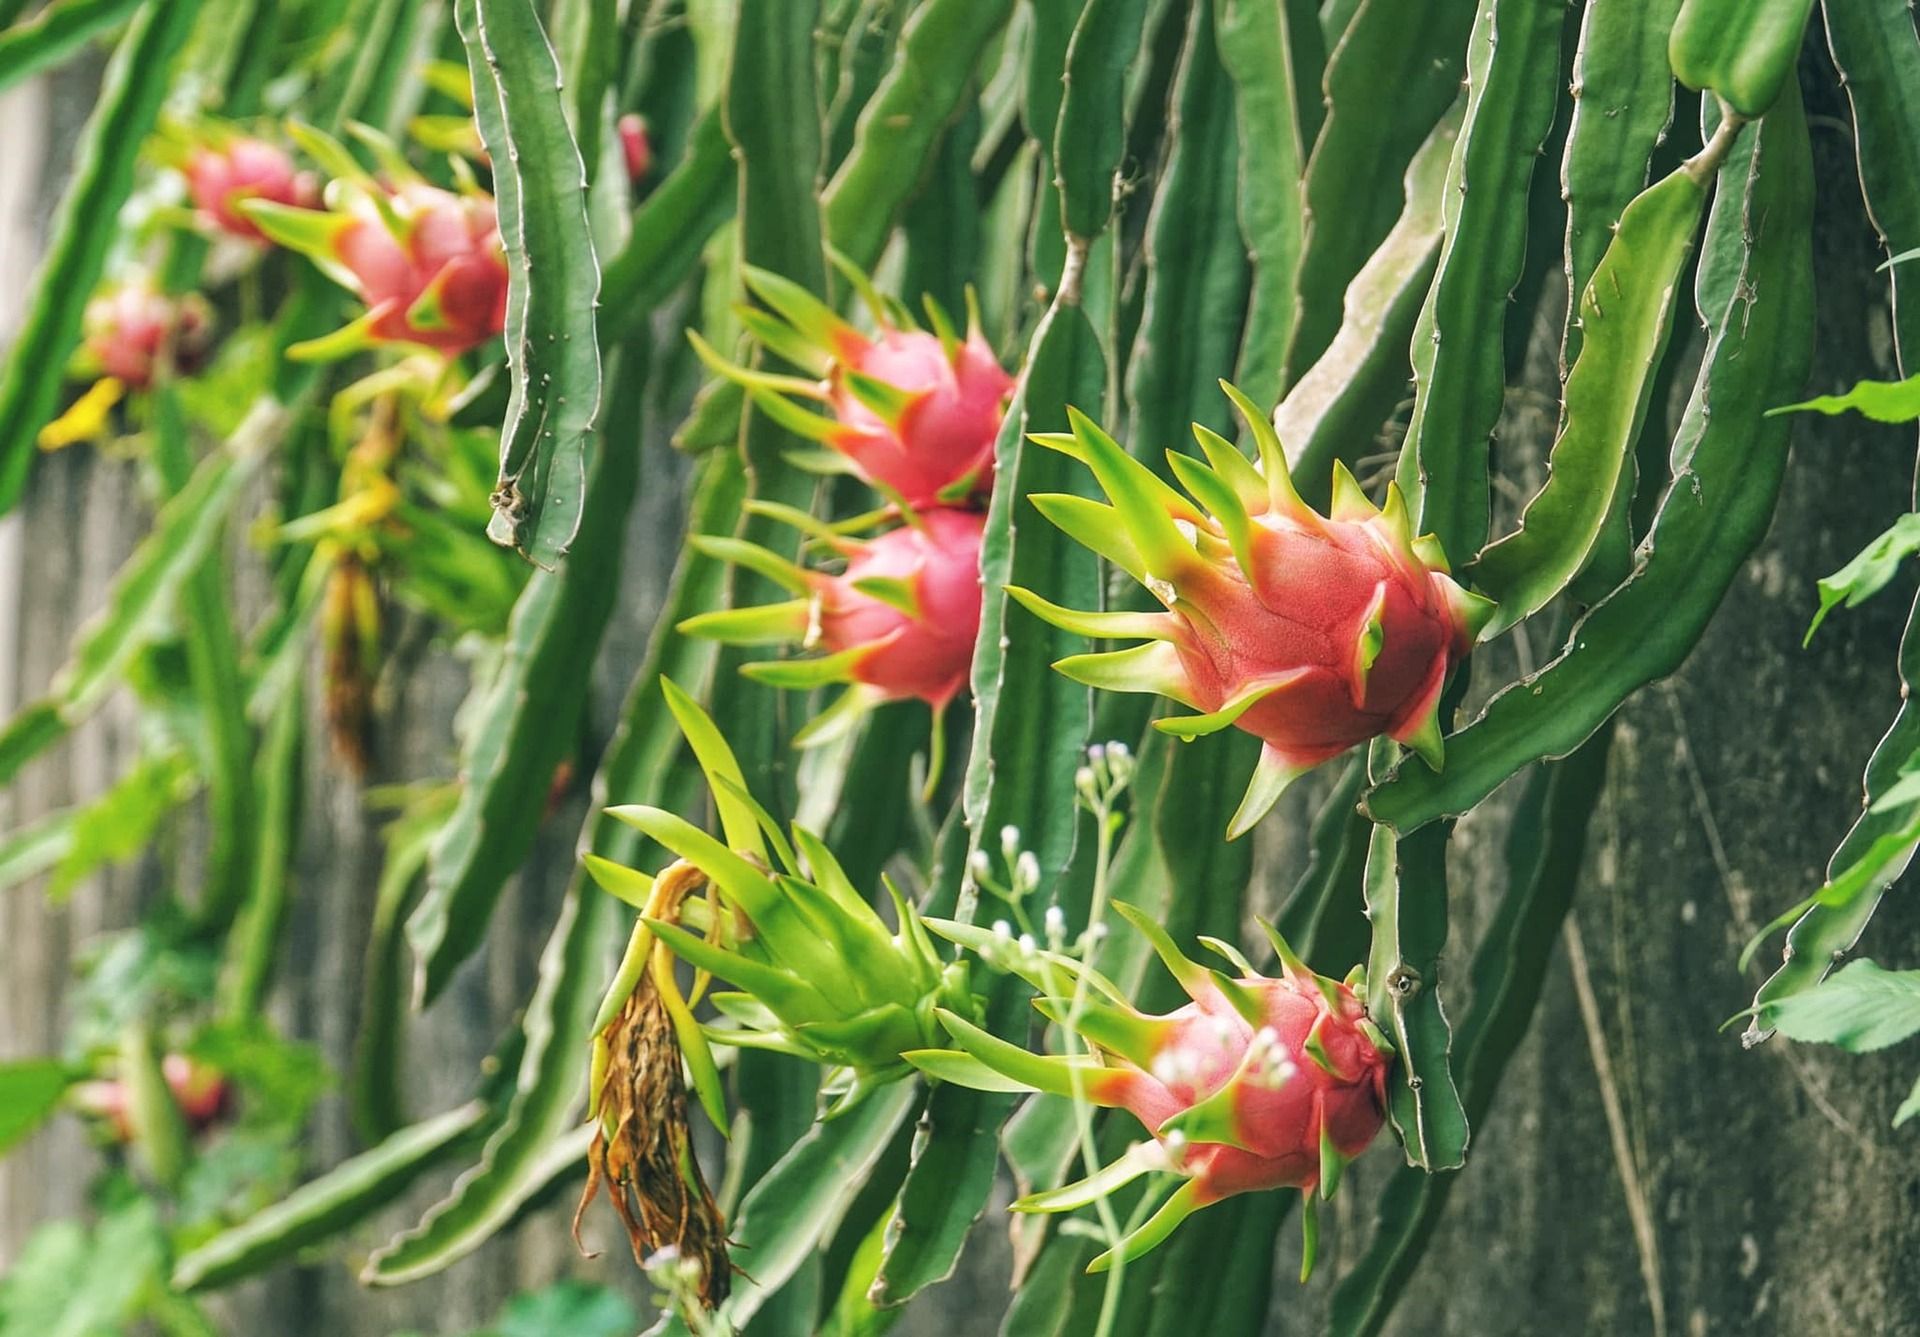 Dragon fruit farm, Image by Quang Le from Pixabay